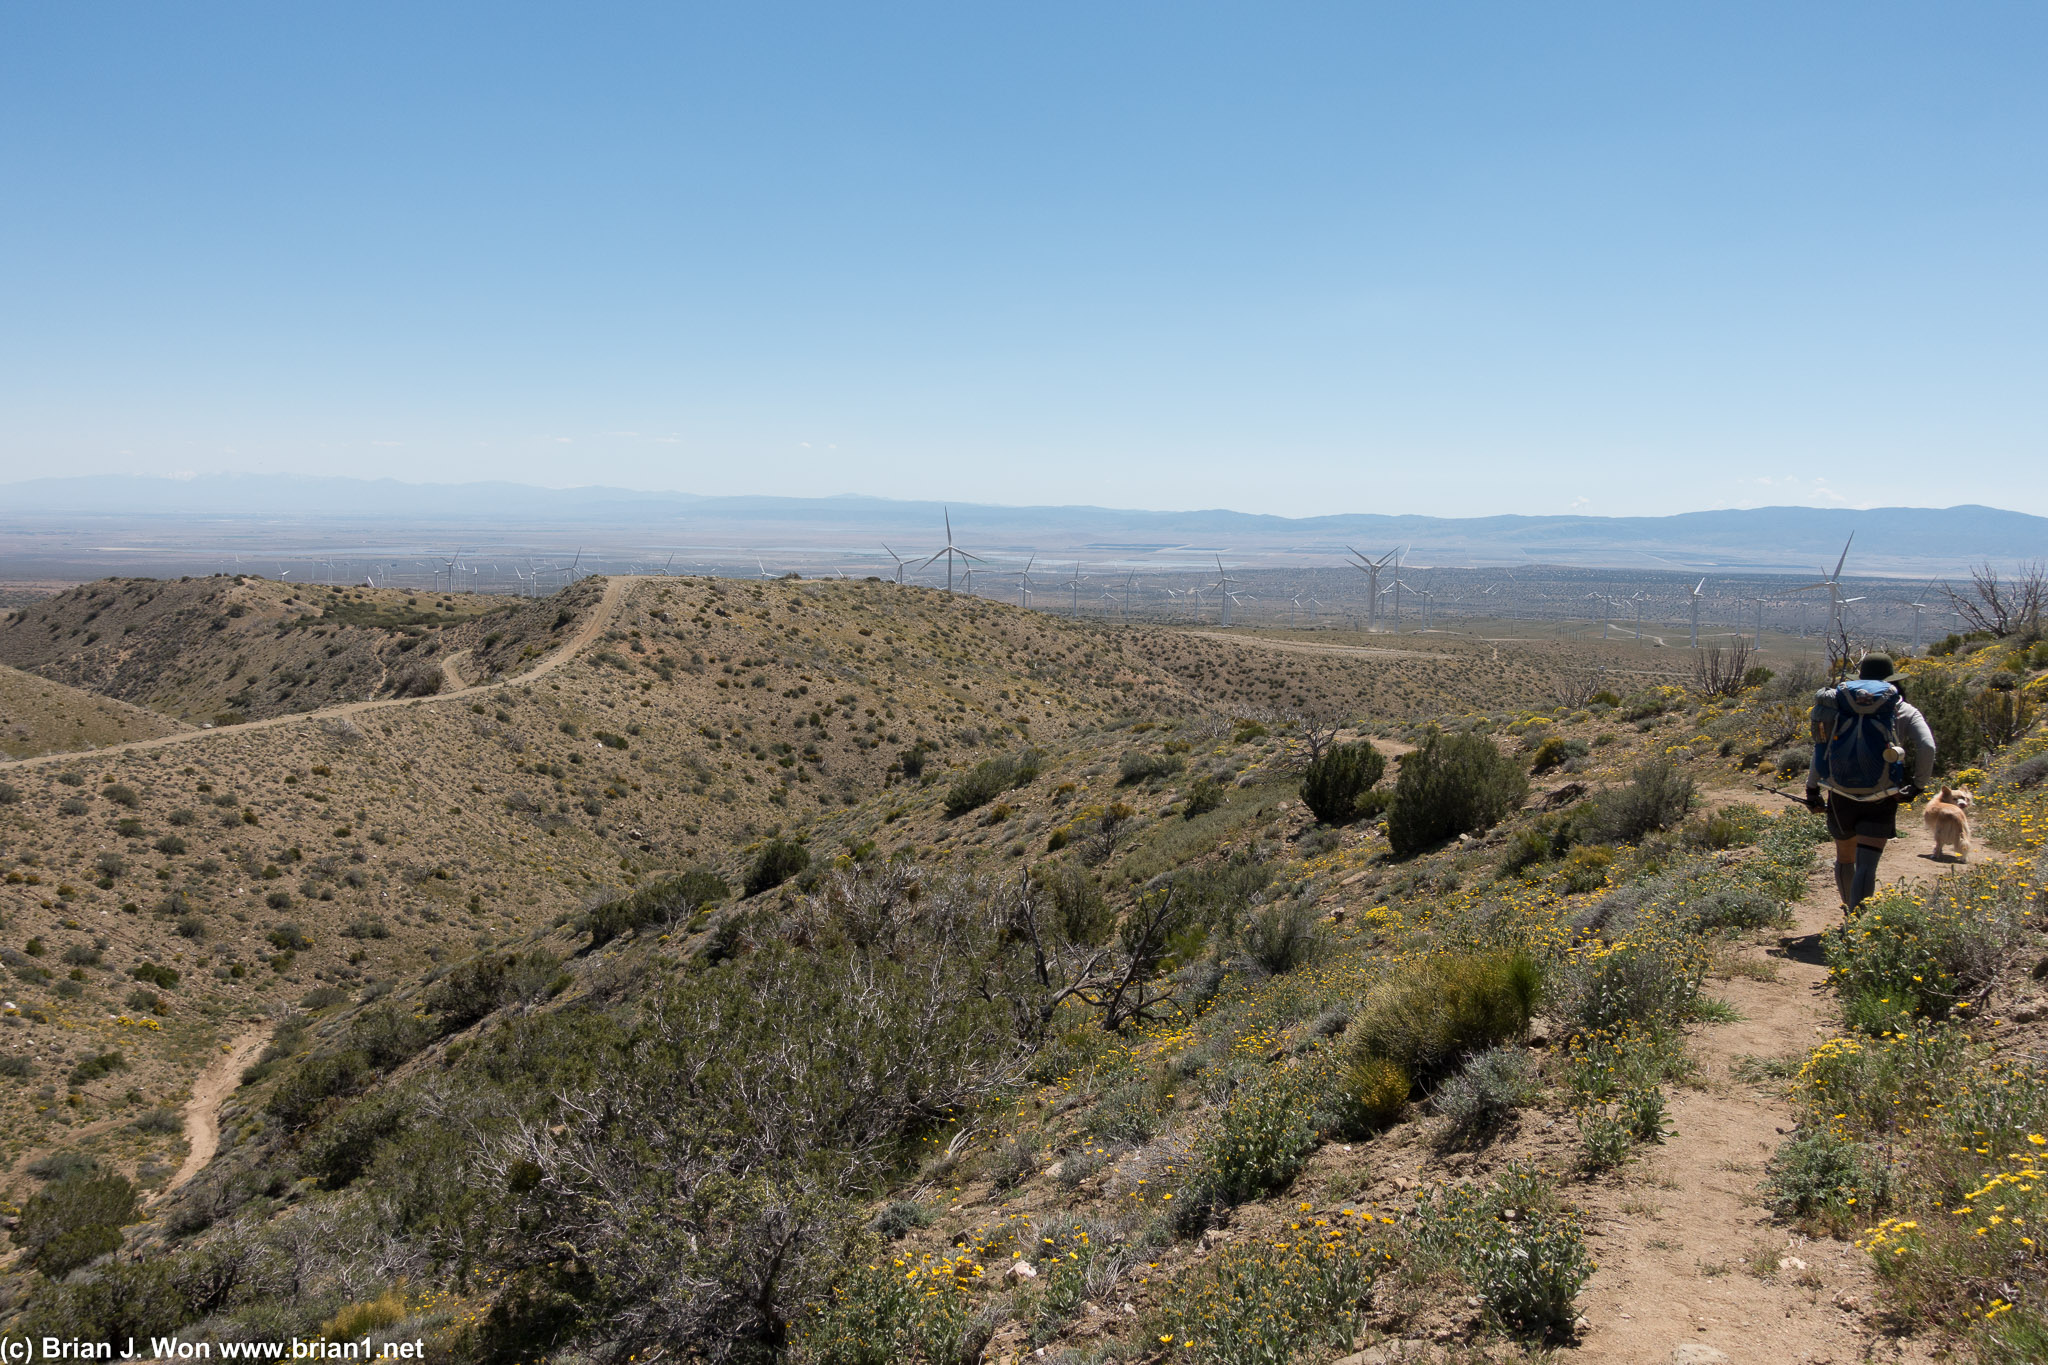 Hiking the PCT, with ATV trails to the left.